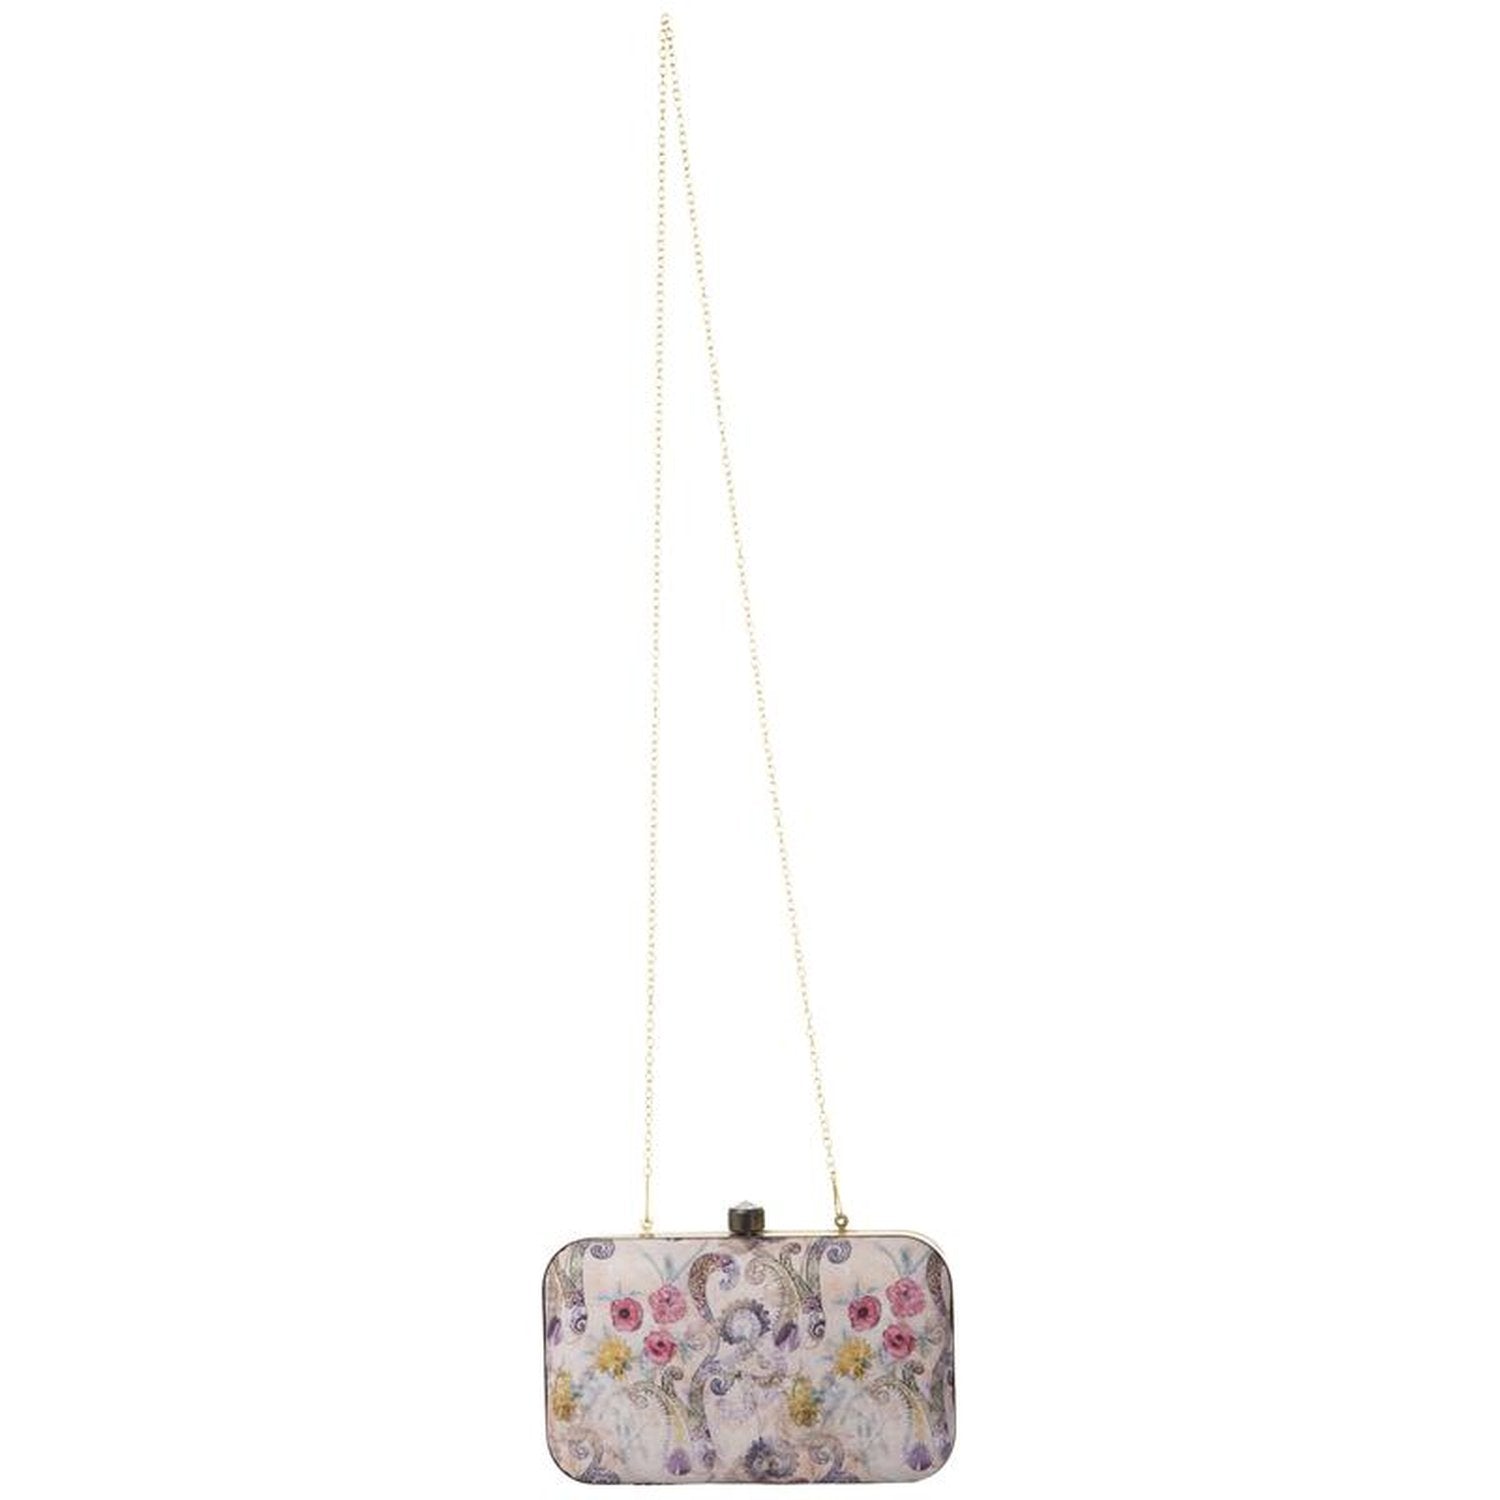 Floral Leather Crossbody Purse: Designer Strap Handbag For Women With  Messenger Style Ideal For Fashionable Daily Use From Nnbvc, $38.58 |  DHgate.Com